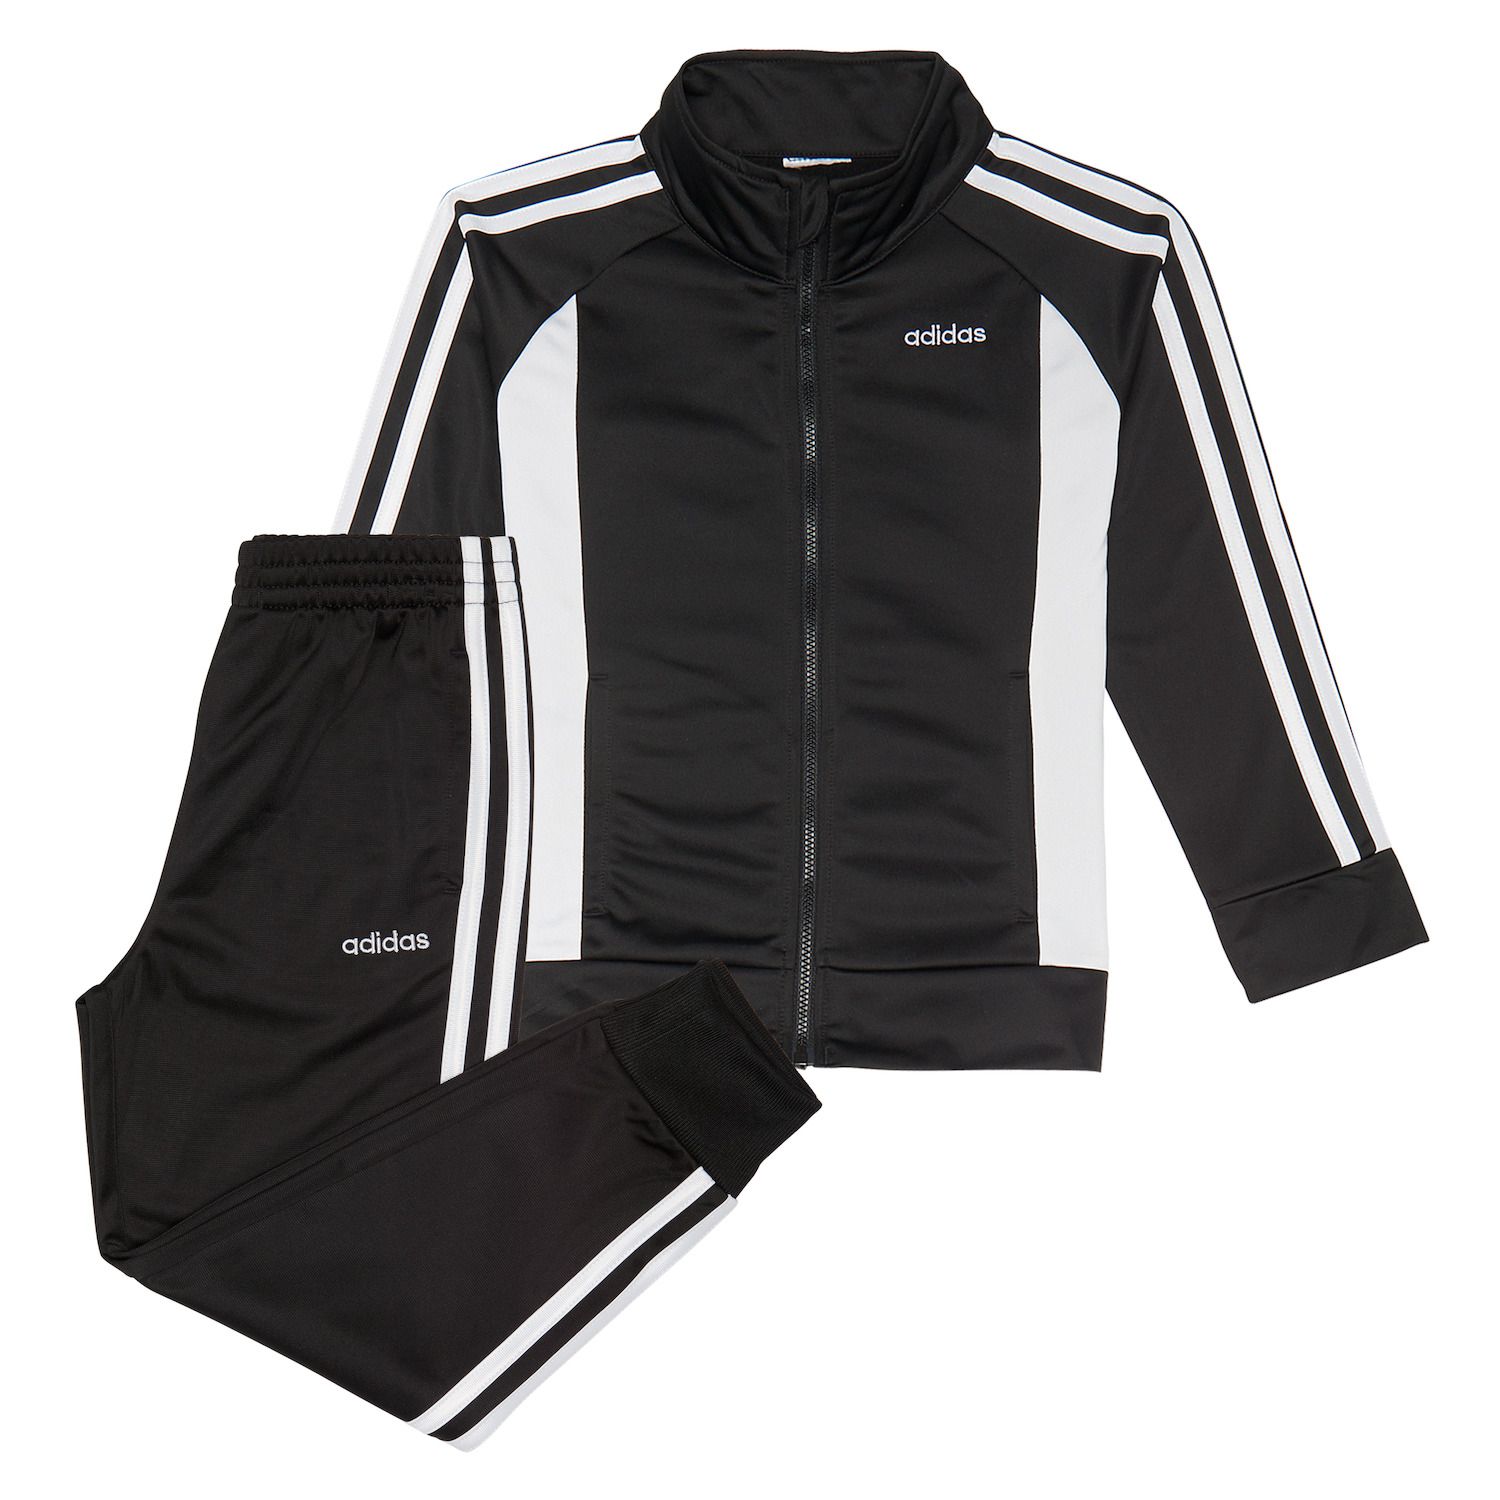 adidas pants and jacket for girls